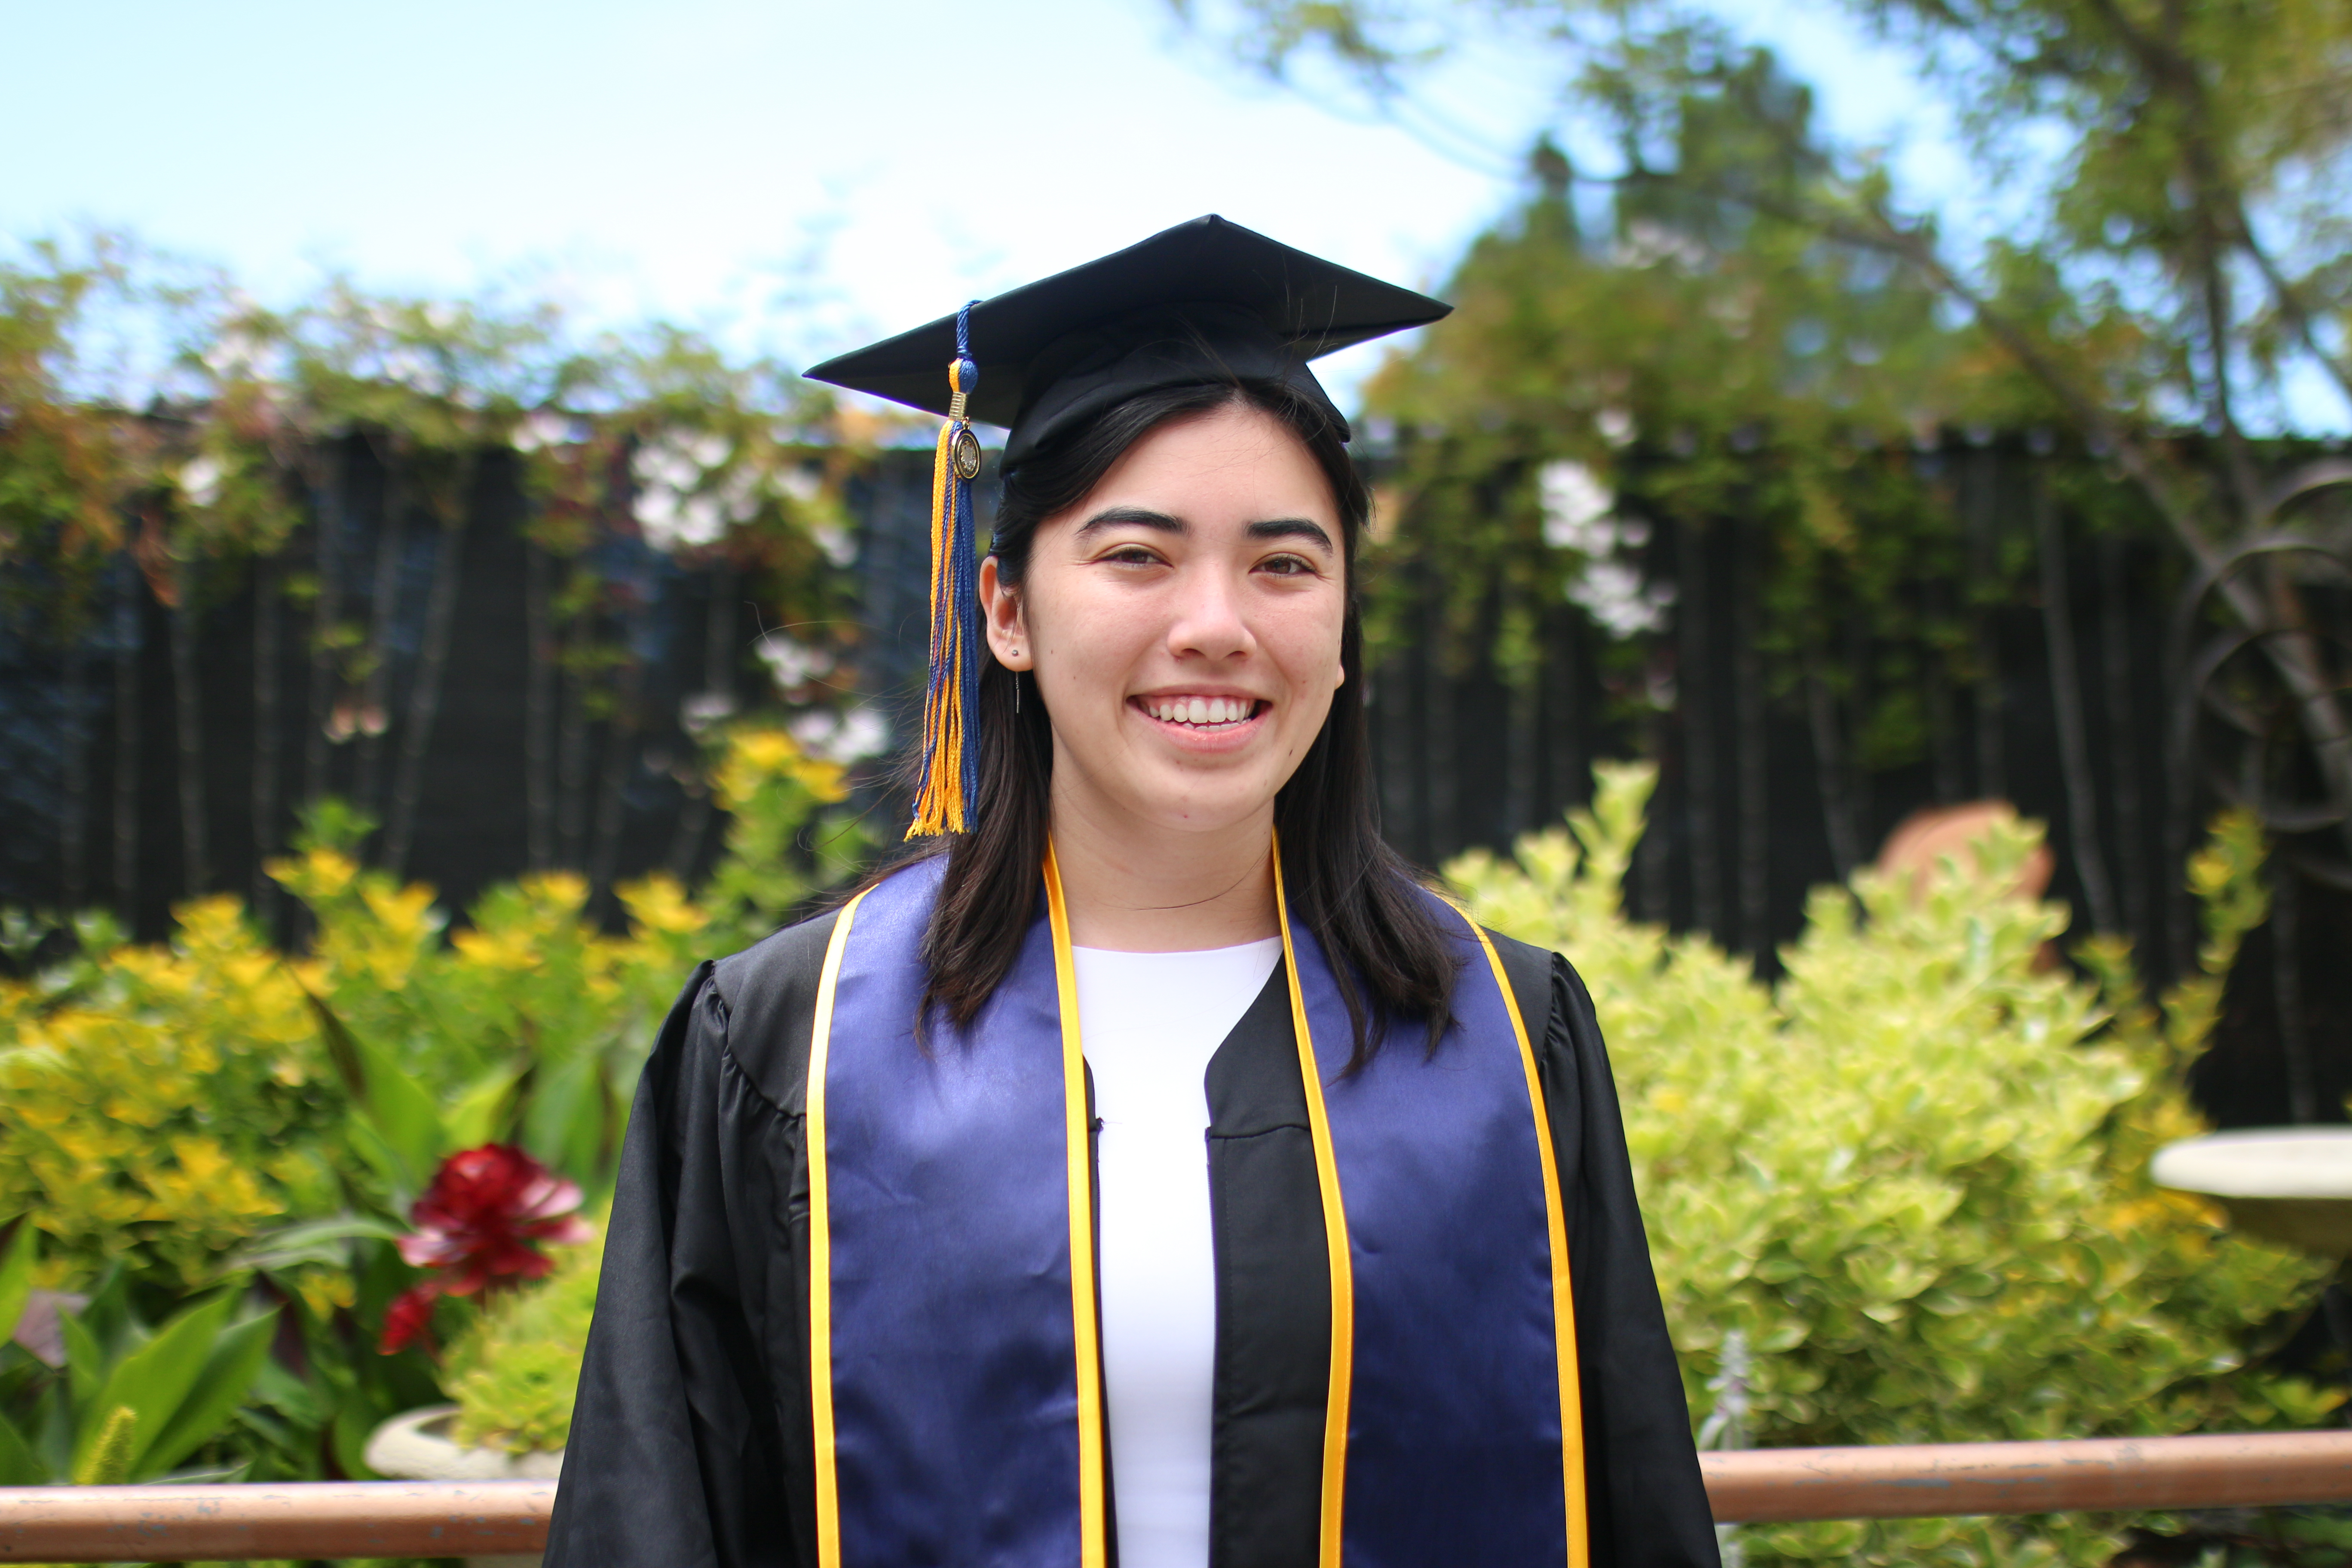 Kate Colvin graduated from UC Berkeley with degrees in data science and public health.